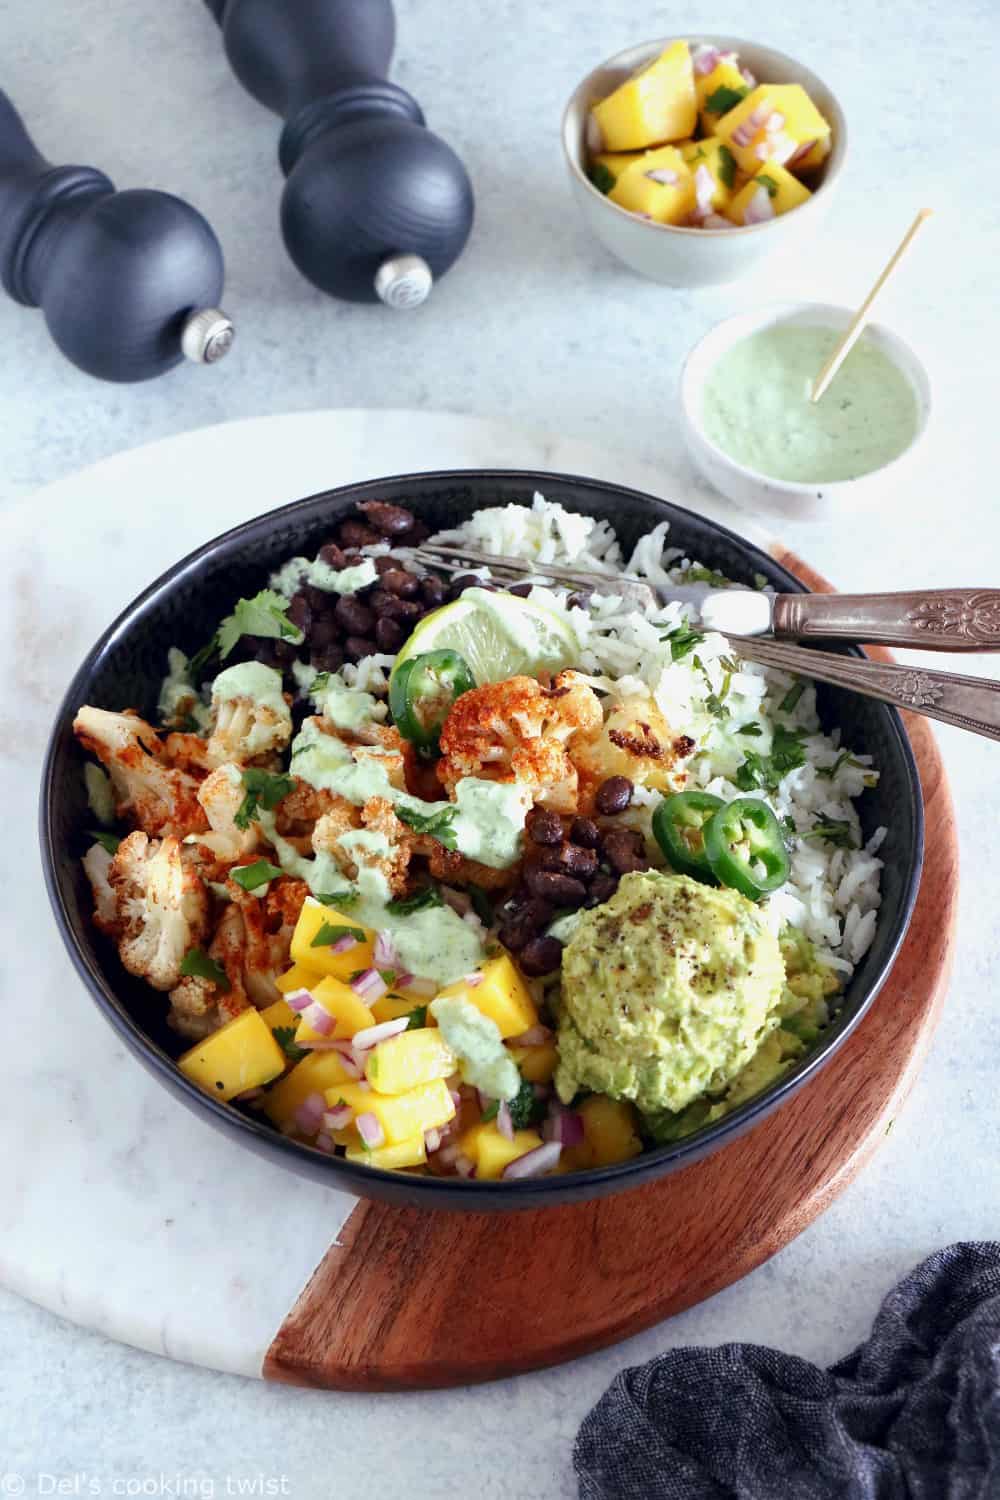 Healthy, colorful, and satisfying, this vegetarian cauliflower burrito bowl will brighten up your lunch game.